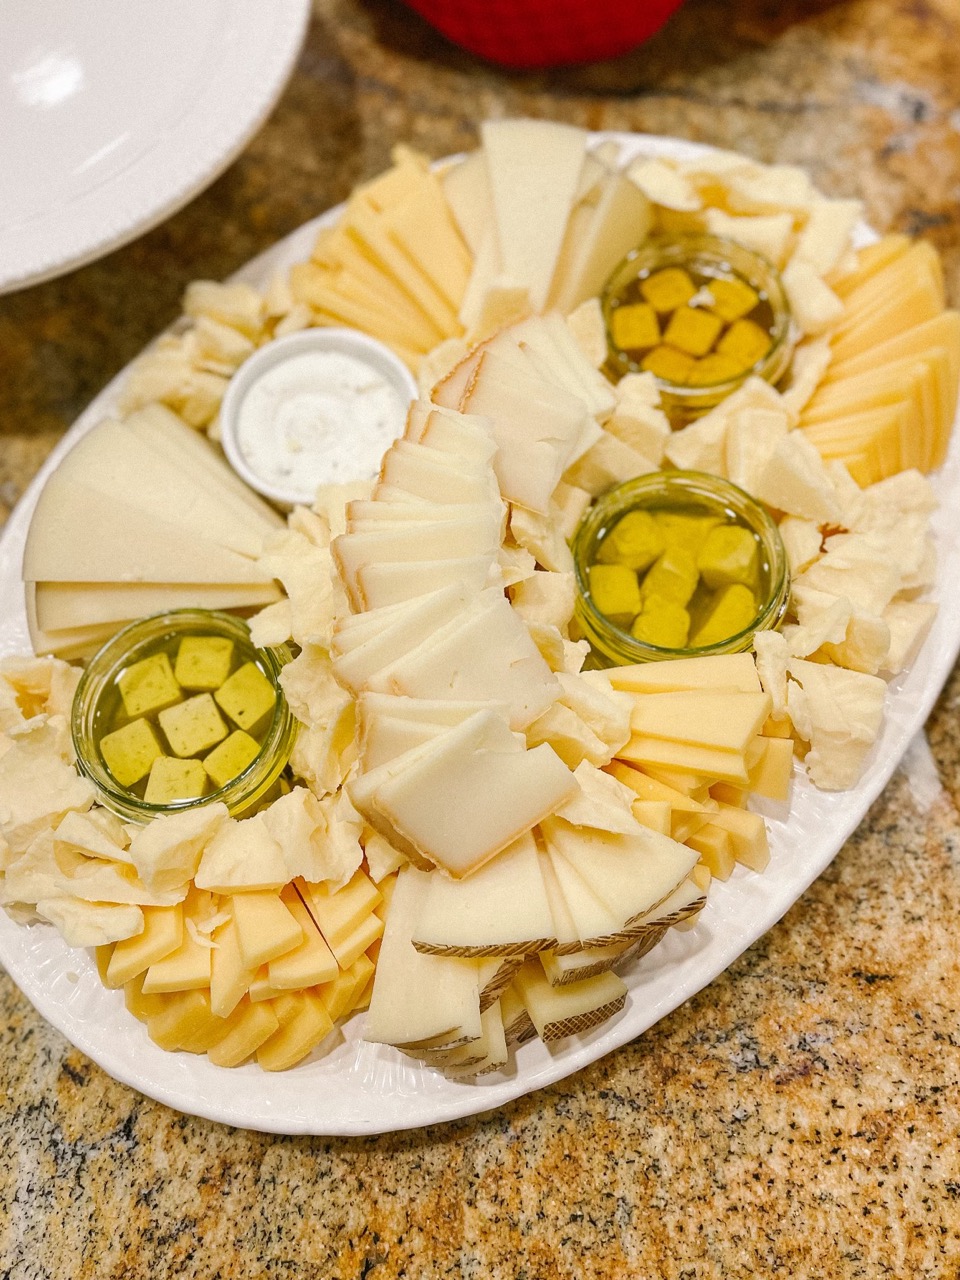 A large oval plate of cheese, featuring slices of gouda, manchego, cheddar and marinated feta in olive oil and herbed goat cheese.